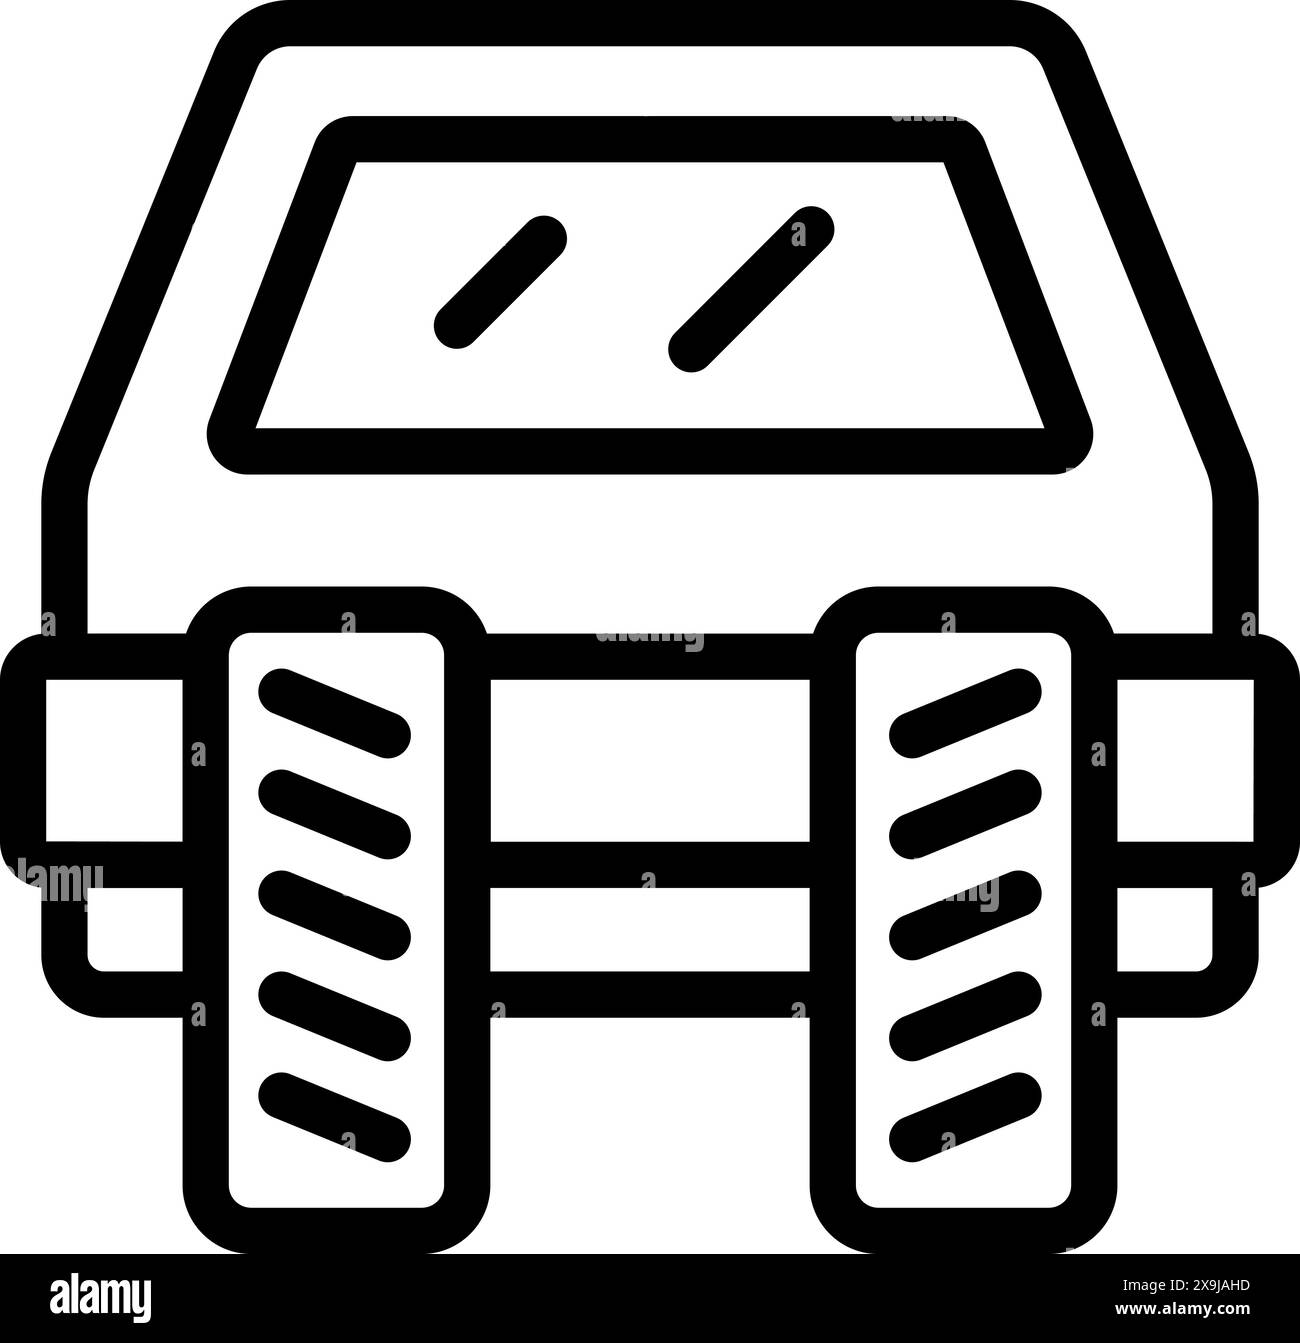 Black and white line art illustration of a simplified, geometric suv vehicle icon Stock Vector